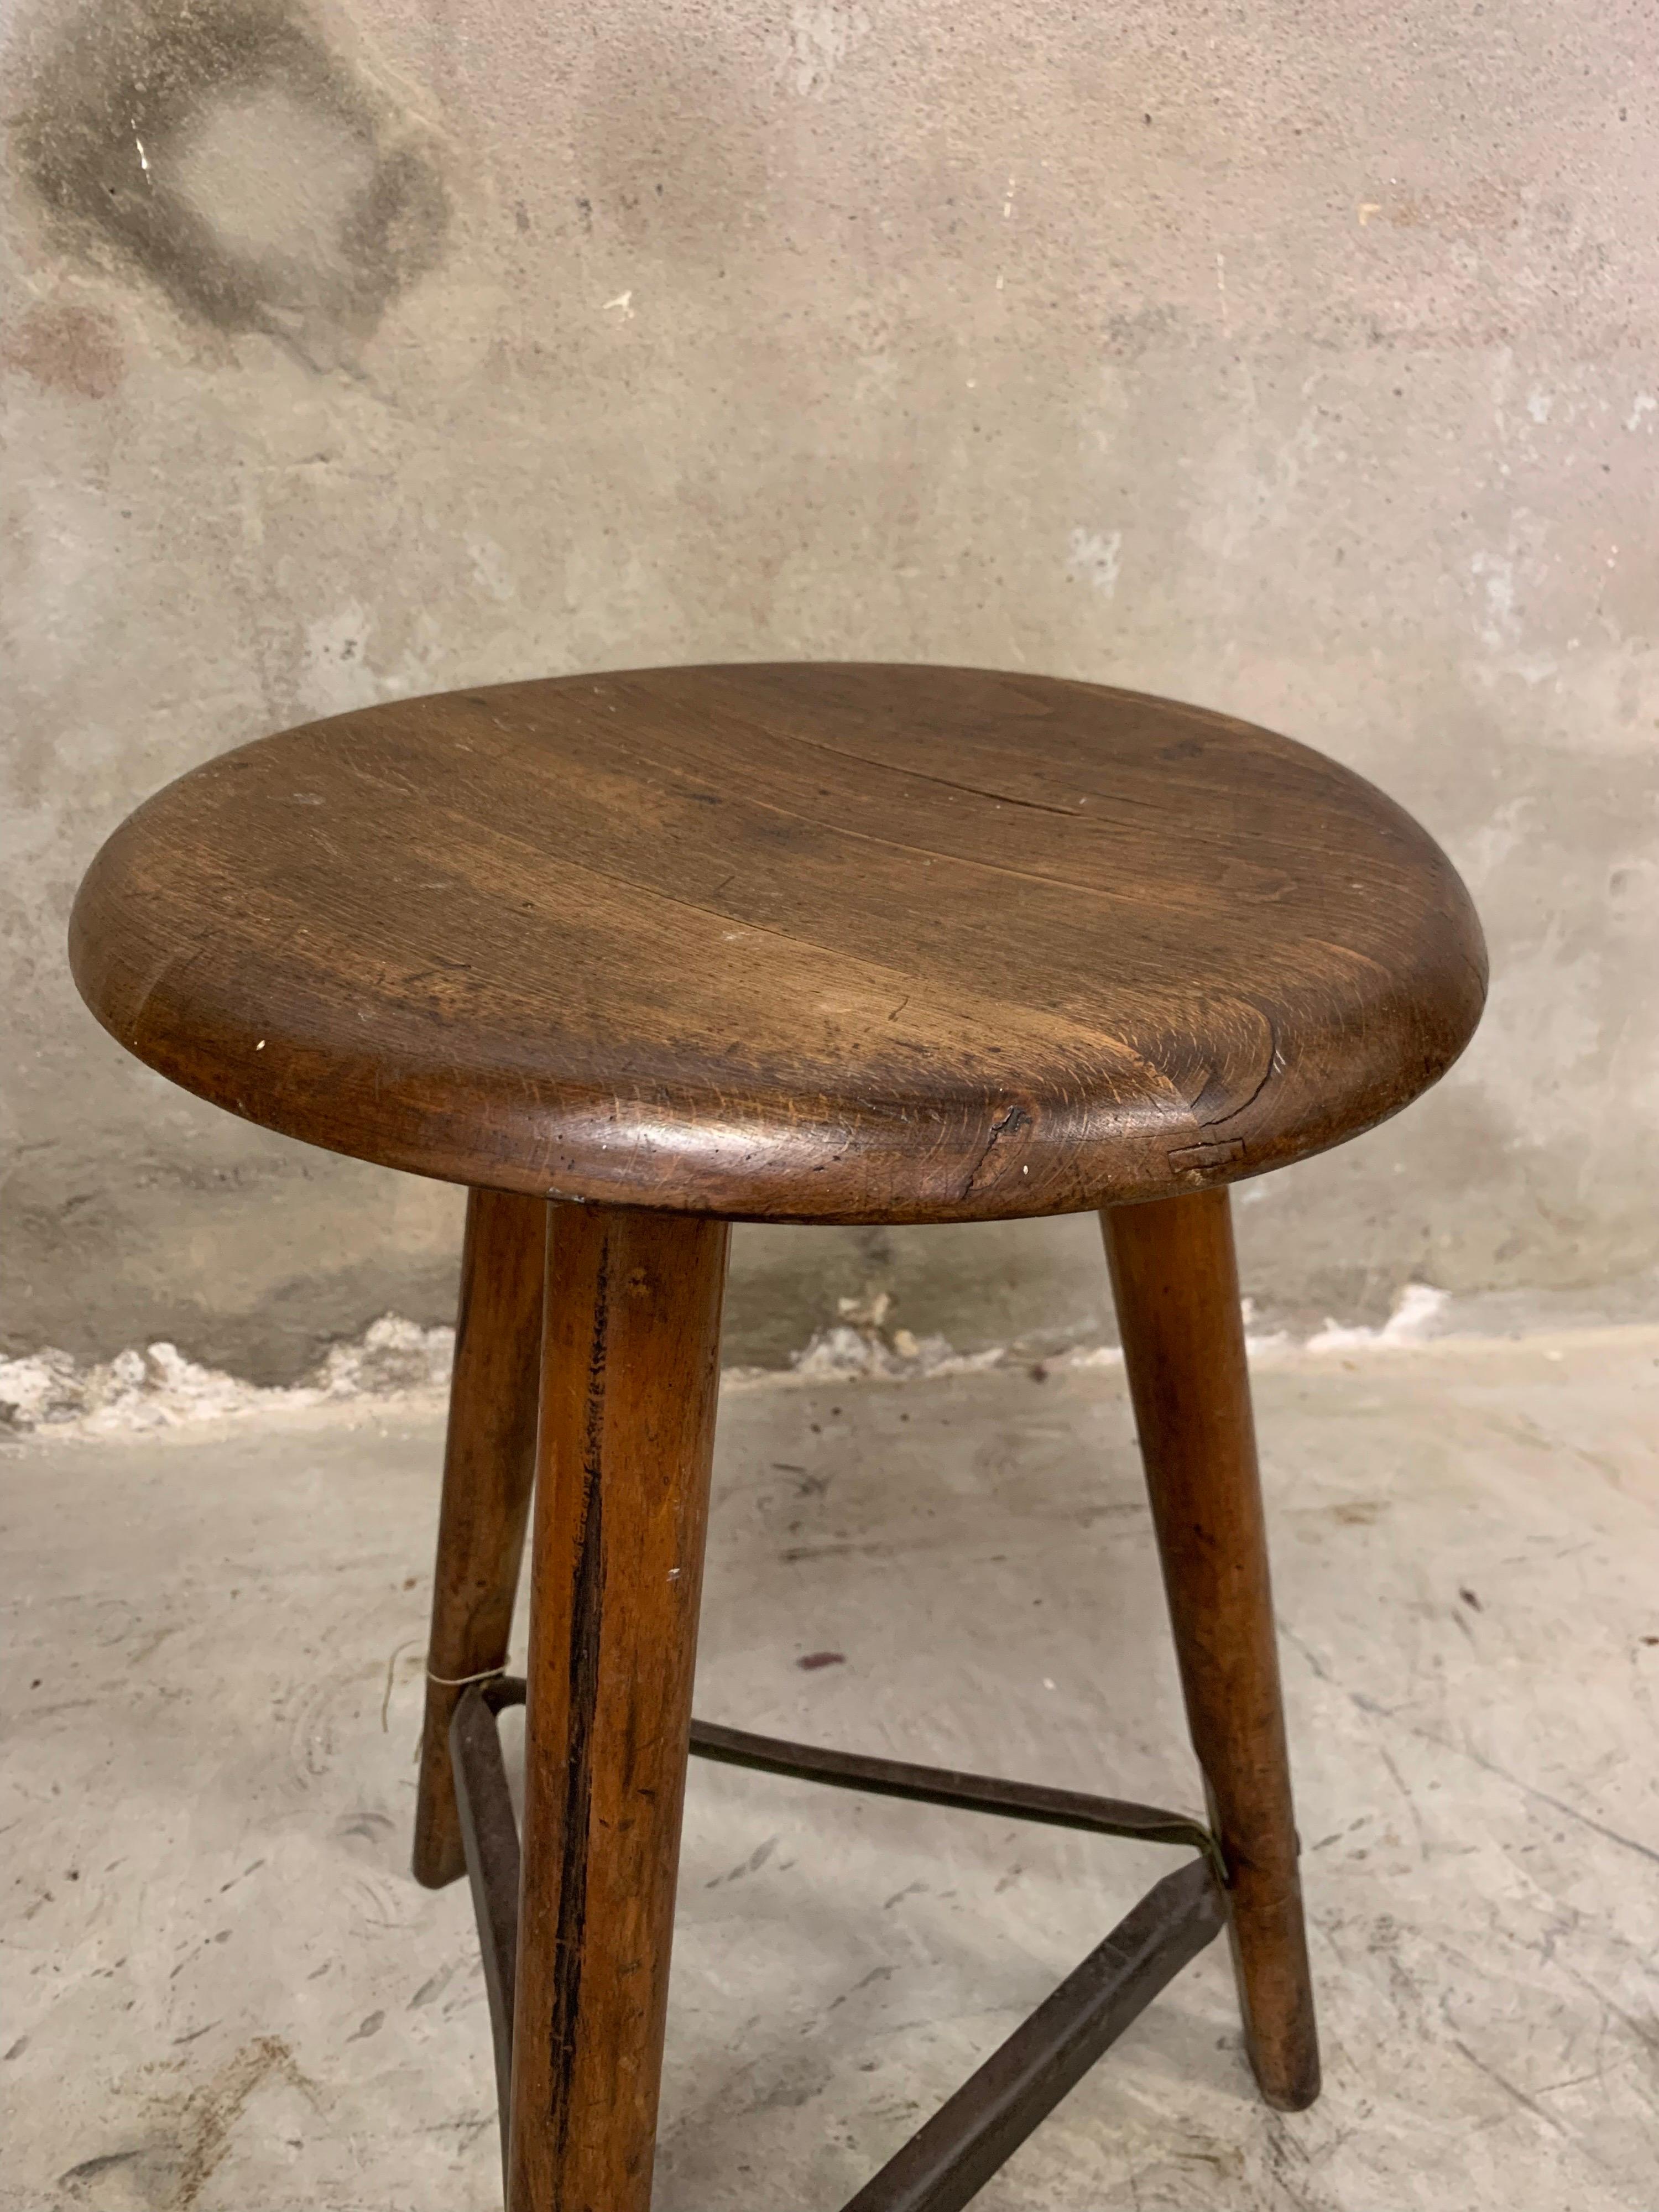 Very nice and in good condition original Ama stool from Germany, wood with partly metal frame. Seat height 60 cm. Diameter 34 cm. Marked AmA on the bottom of the seat.

From the 1920s/30s. Clean and treated. Nice item for the enthusiast!